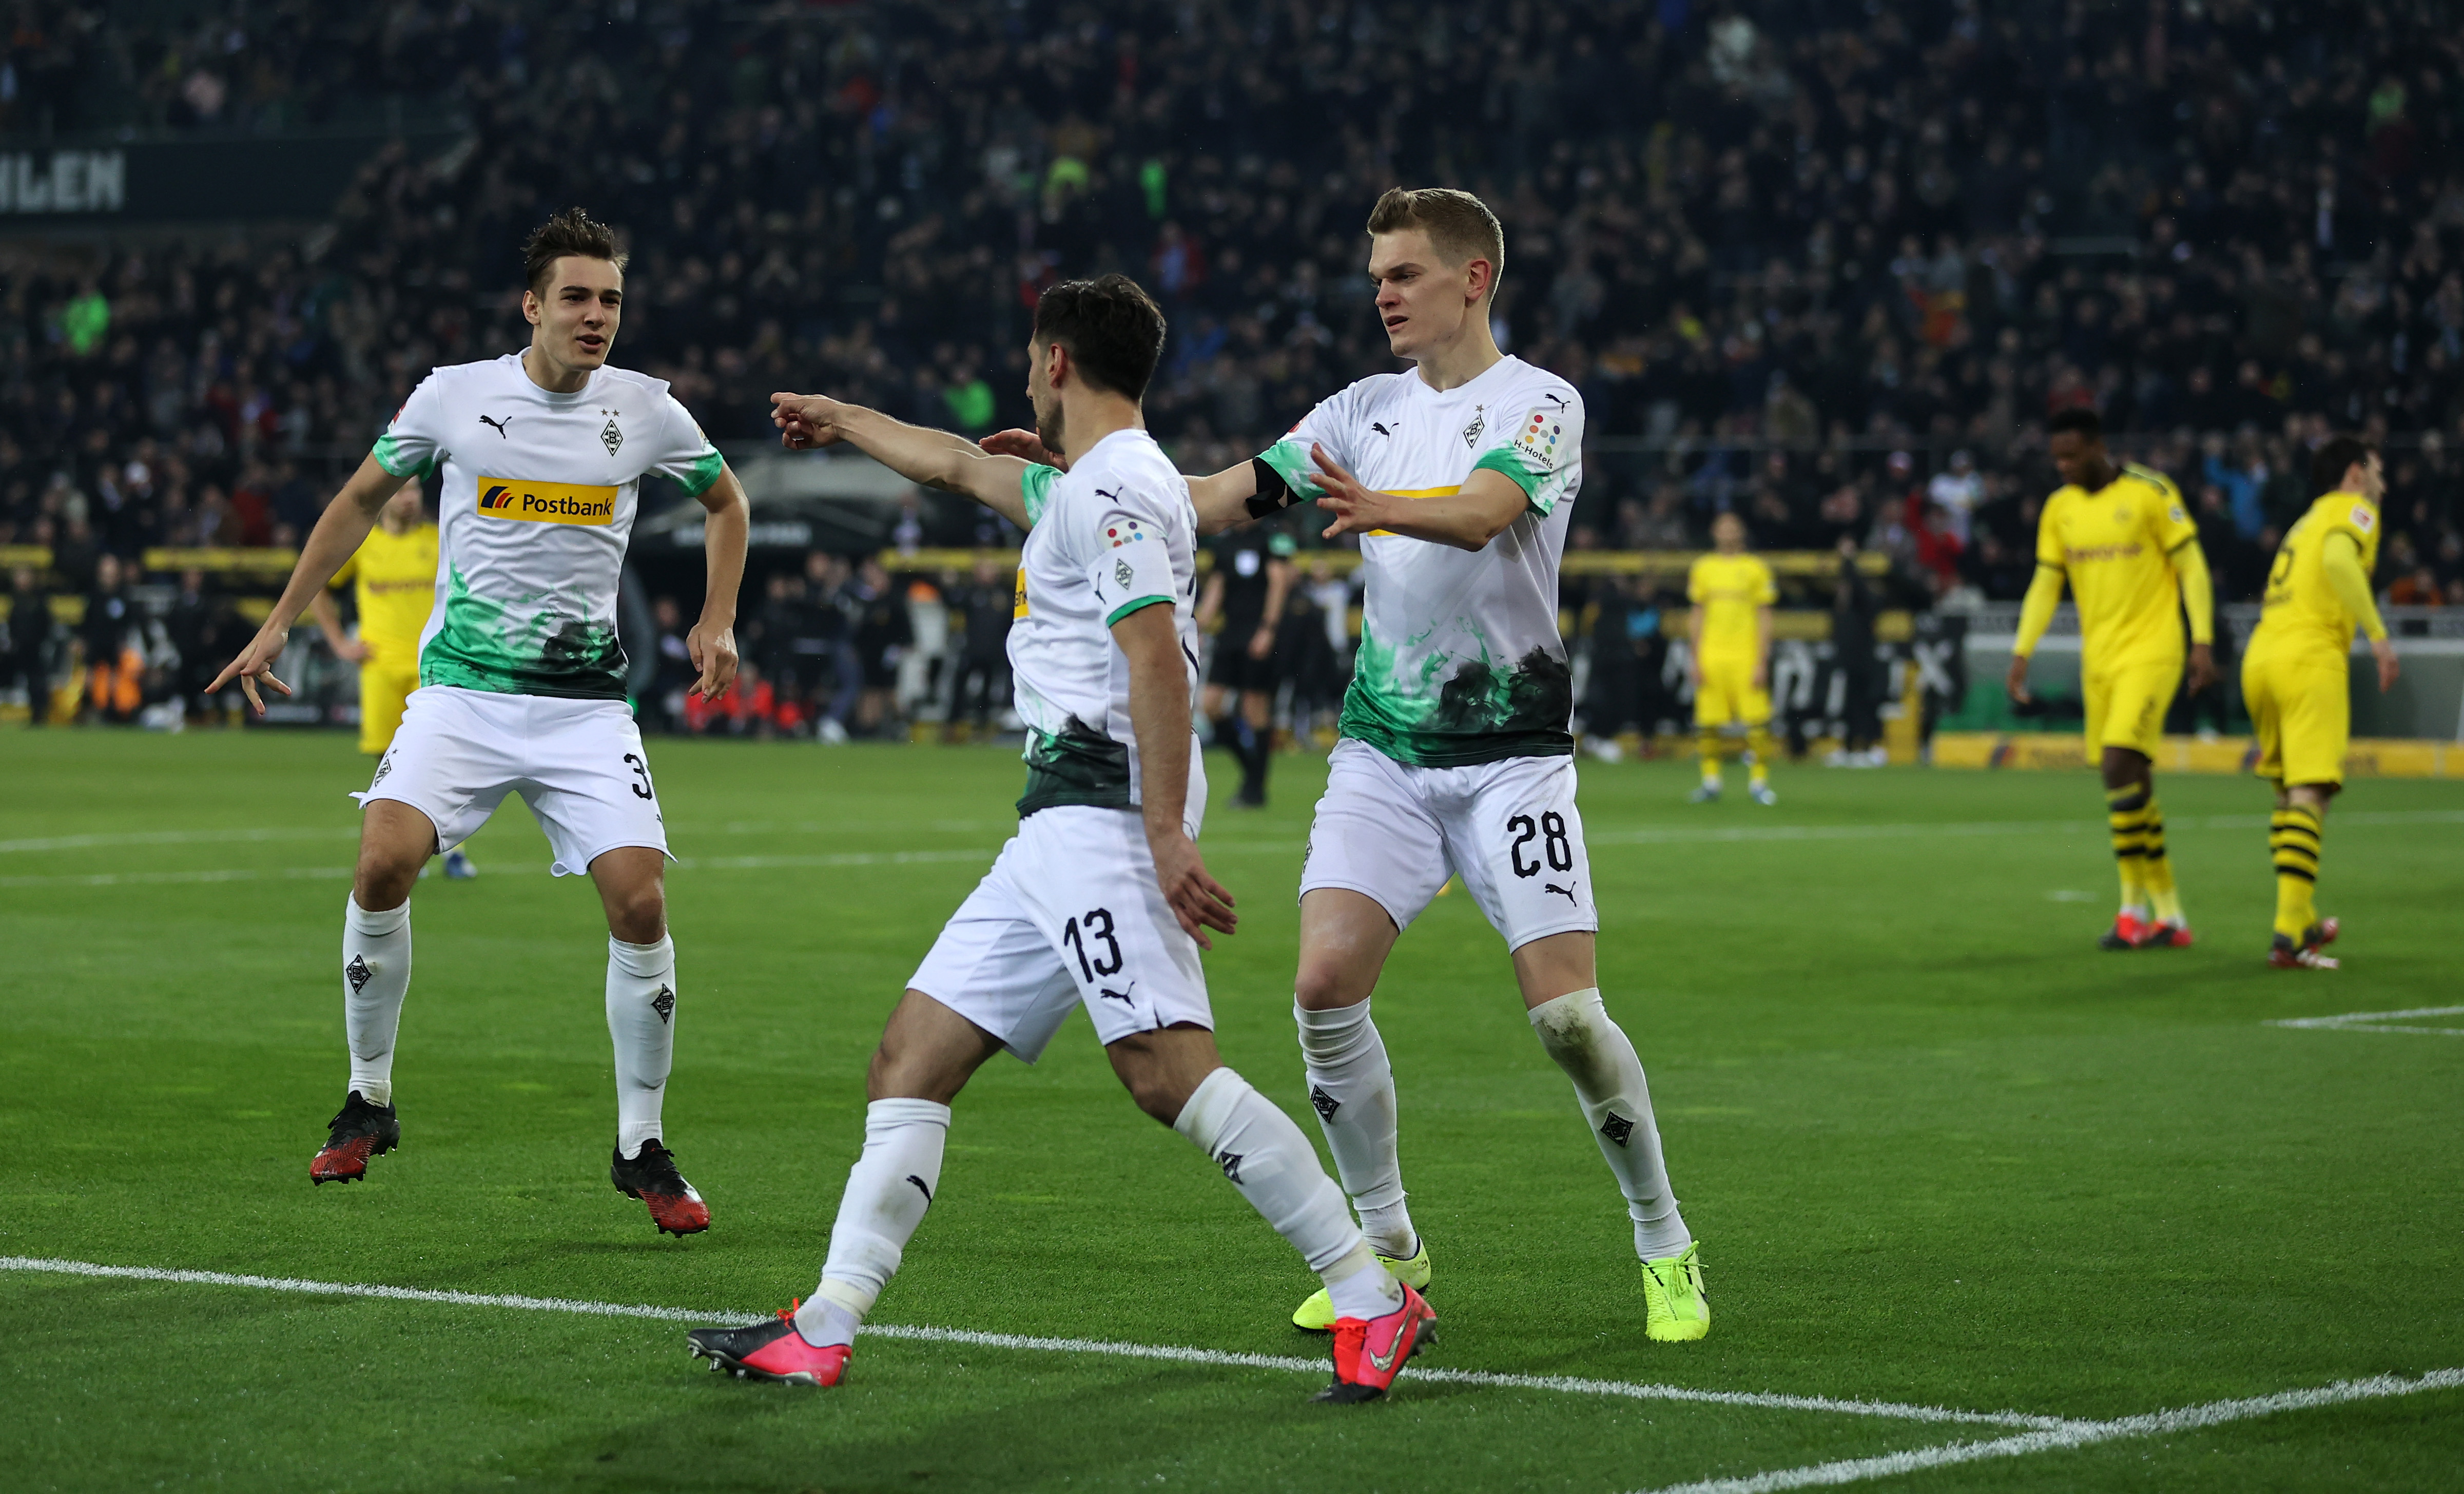 Borussia Monchengladbach could not keep up with the pace at the top.